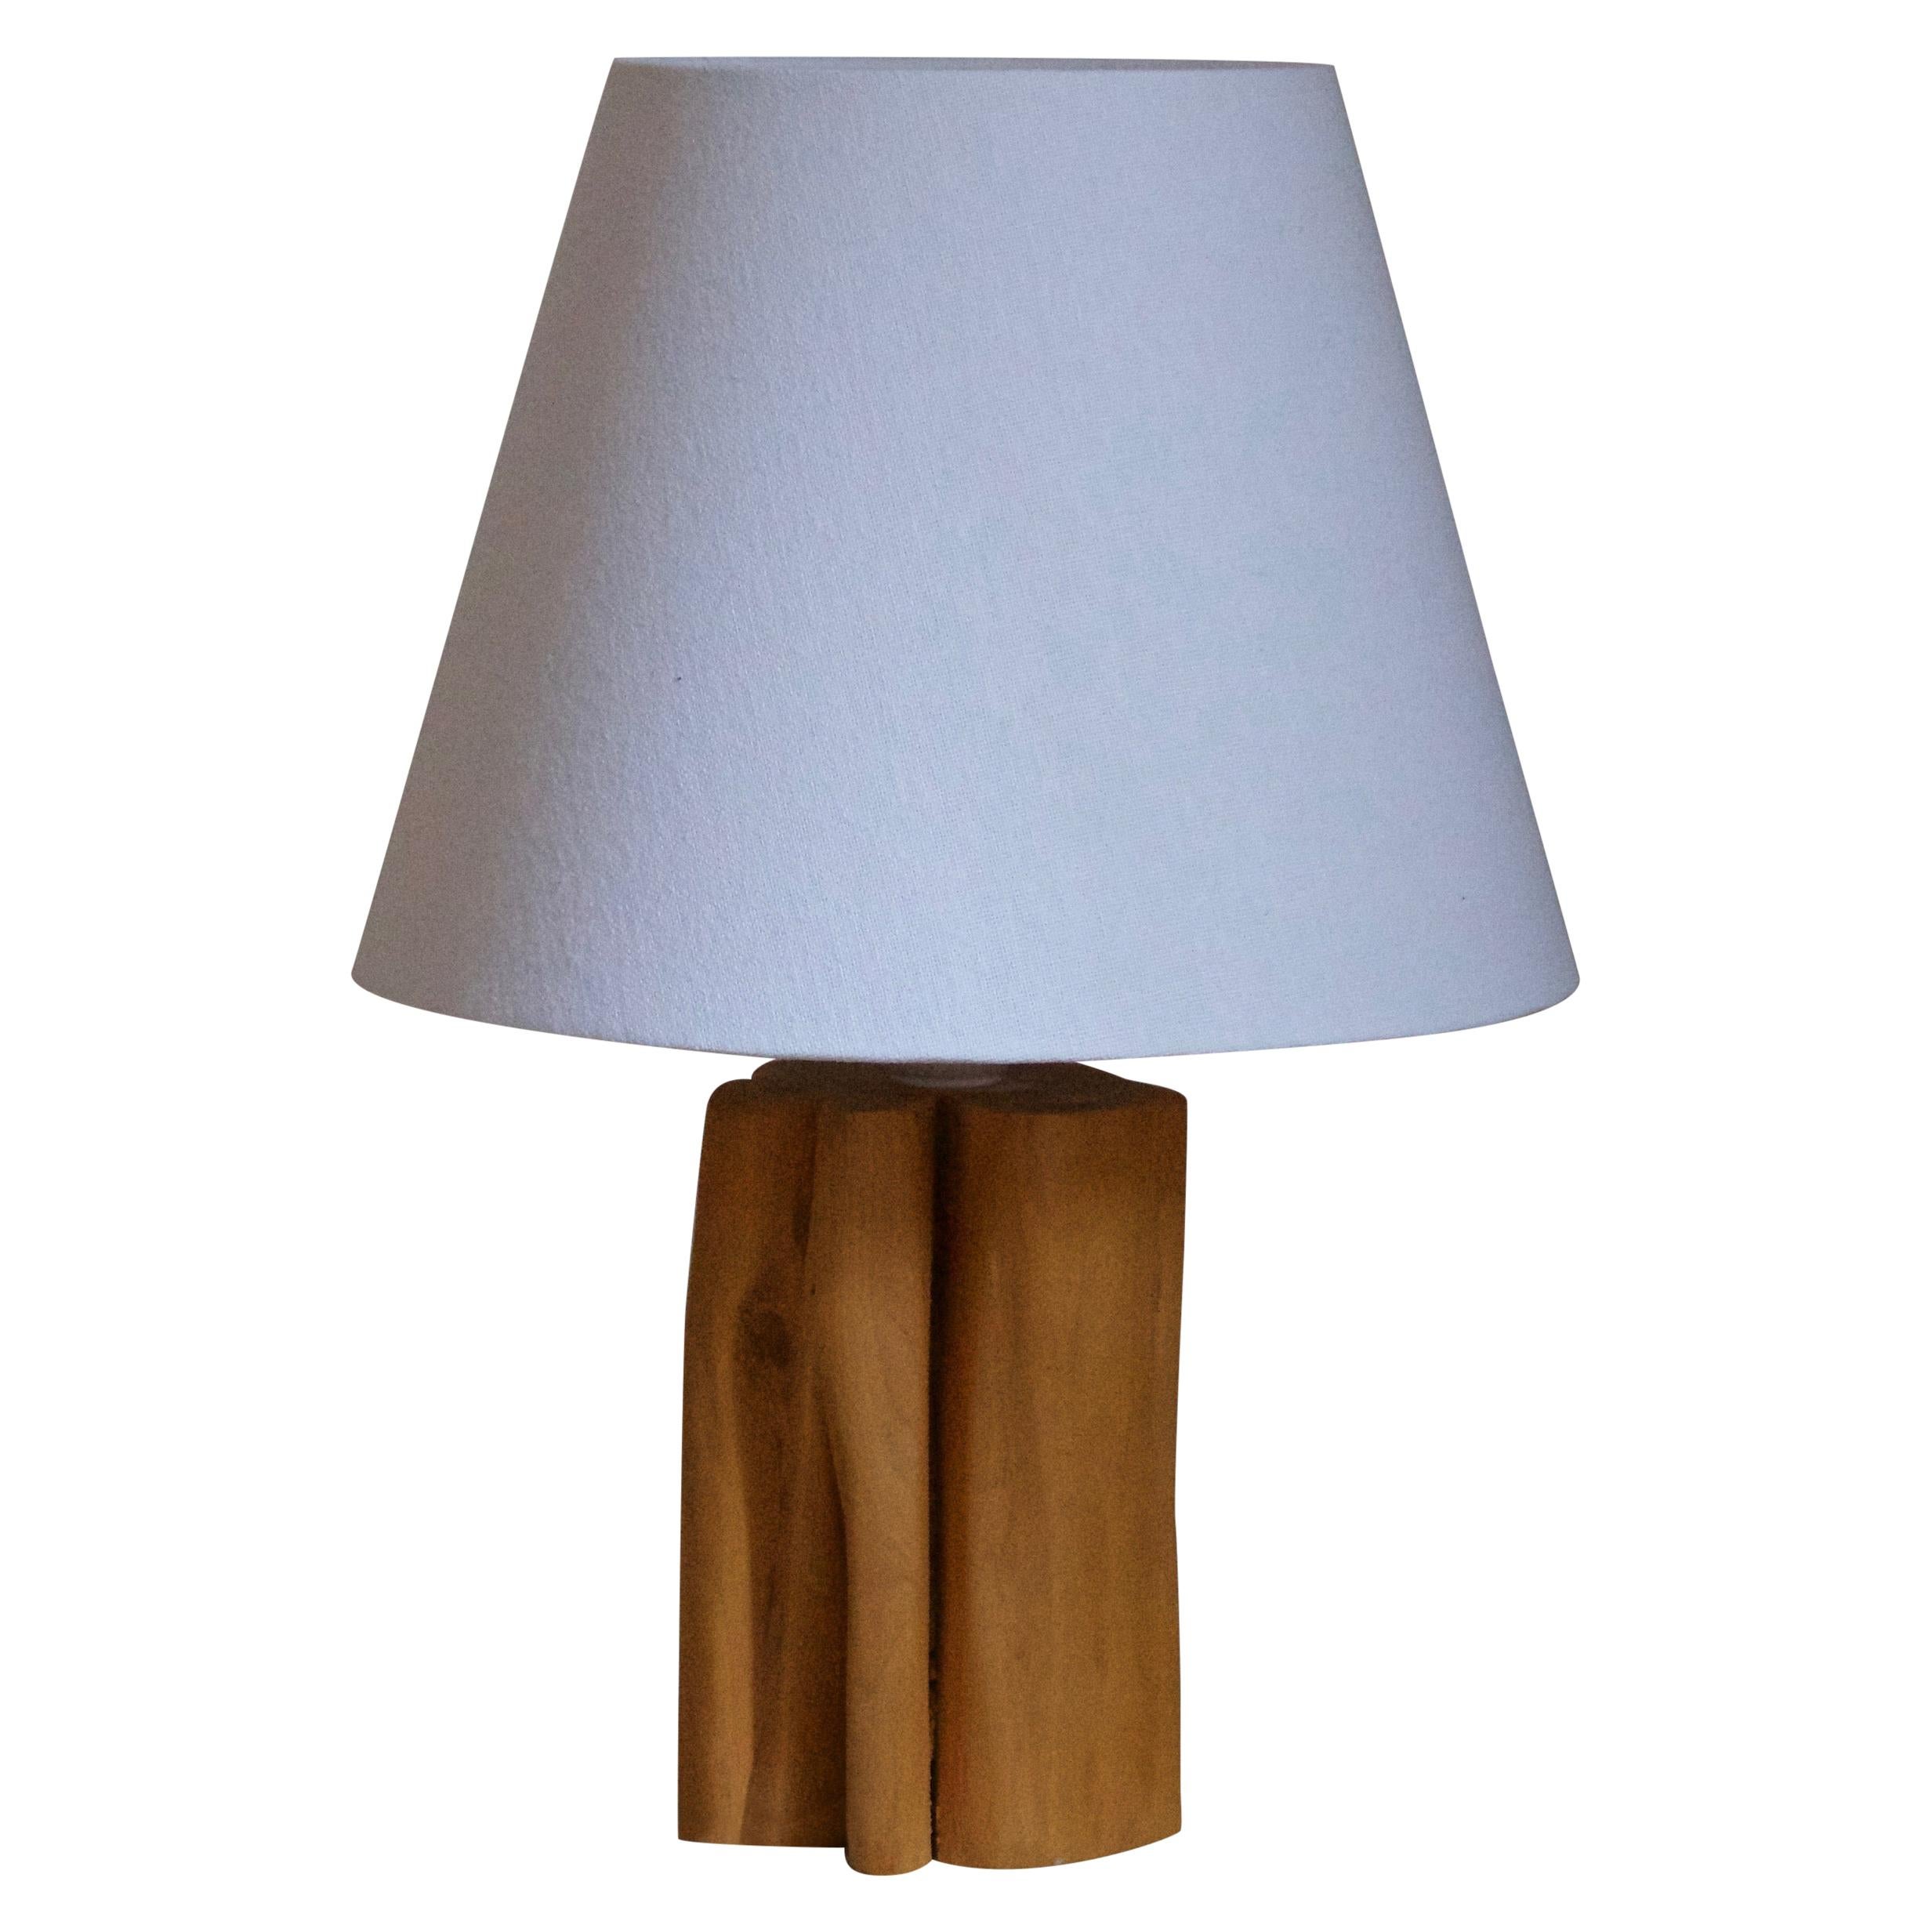 Swedish Craft, Organic Table Lamp, Wood, Sweden, Signed and Dated 1971